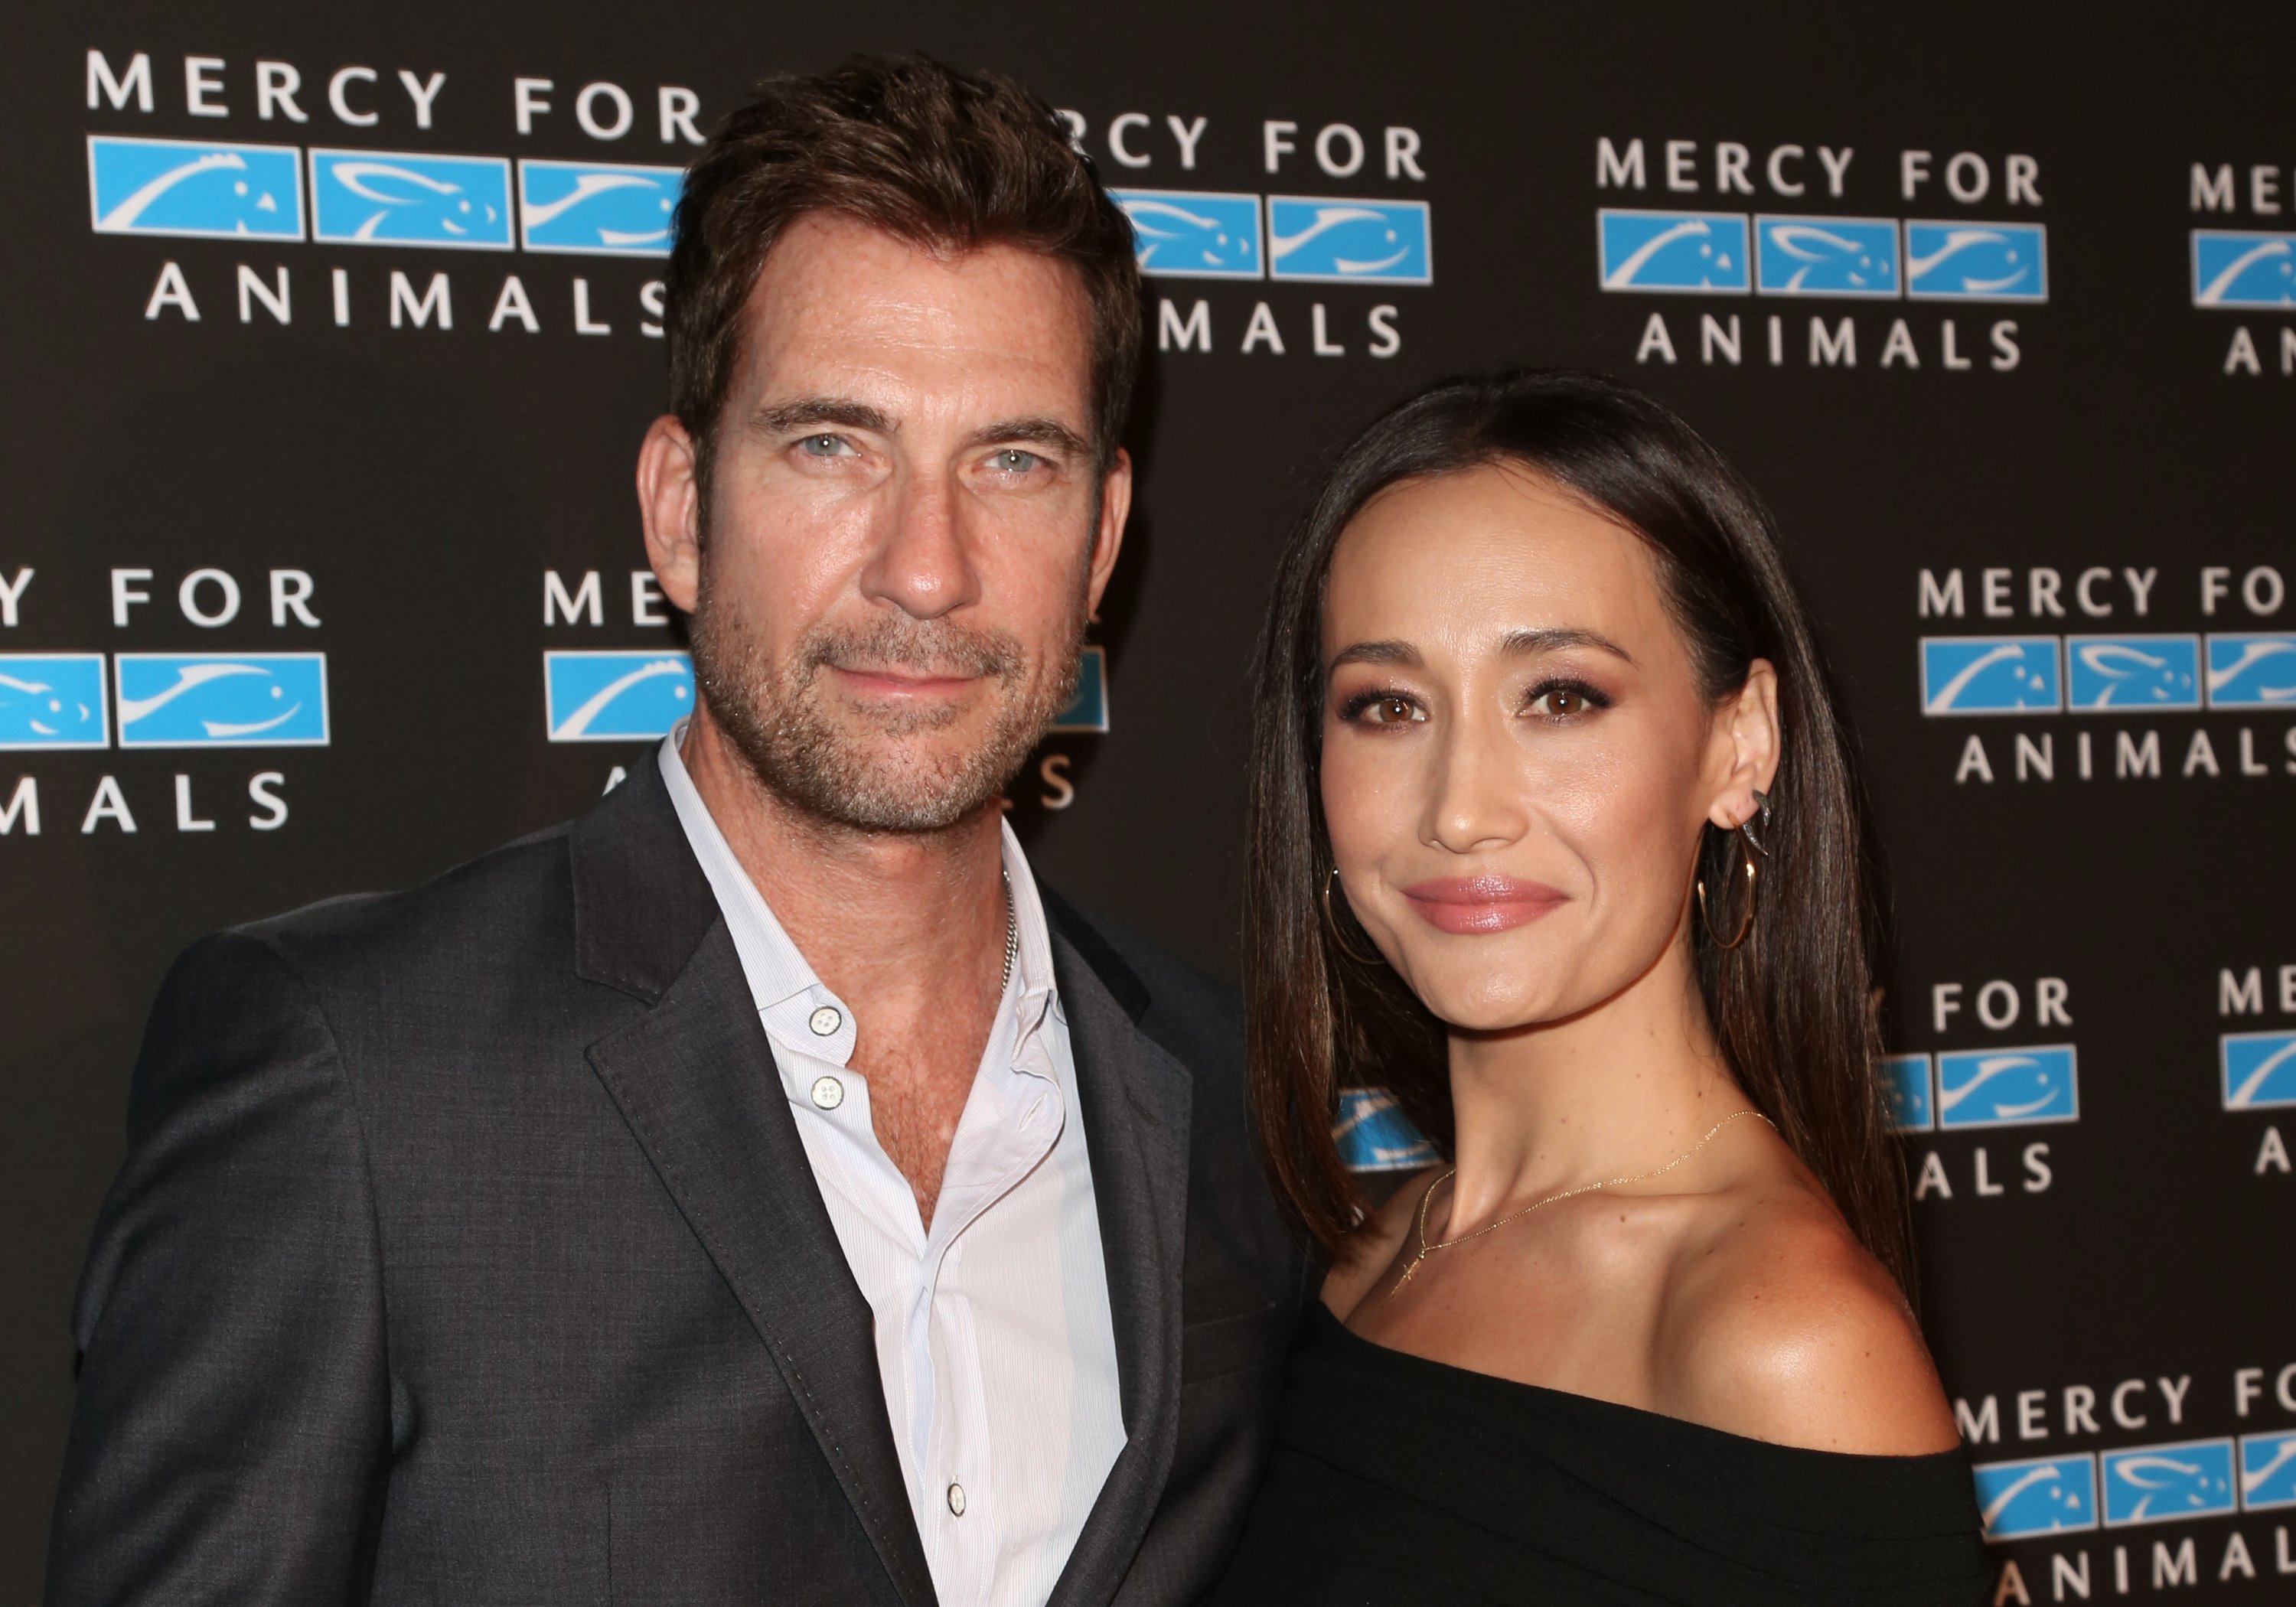 Dylan McDermott and Maggie Q attend the Mercy For Animals Presents Hidden Heroes Gala 2018, Los Angeles, California. | Photo: Getty Images